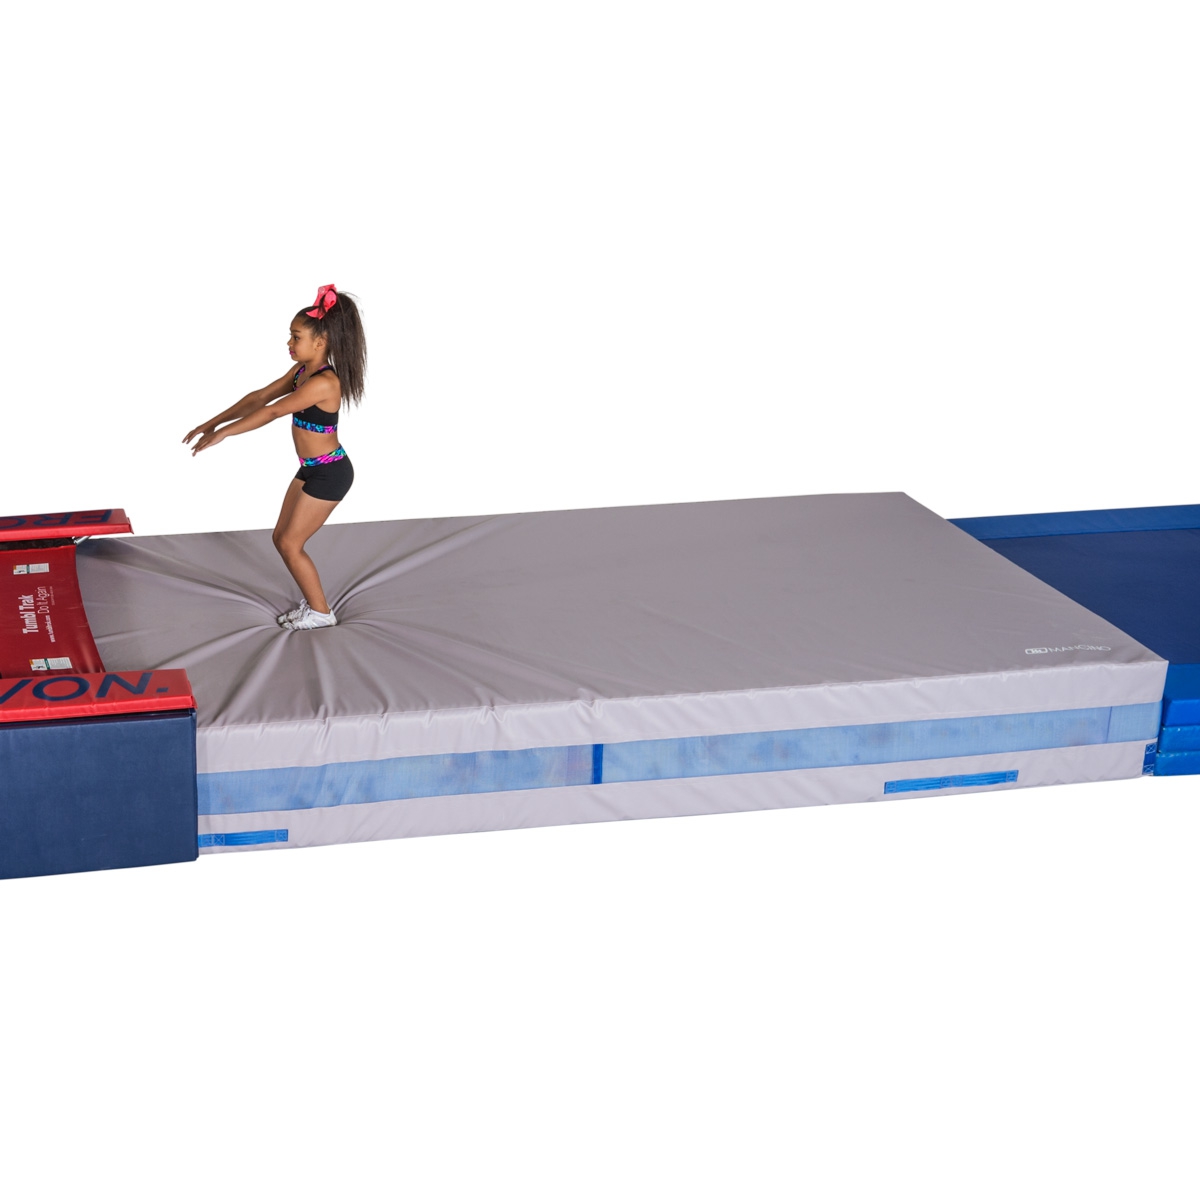 Tumbl Trak: Rebound Mat for Gymnastics Cheer Dance Exercise And